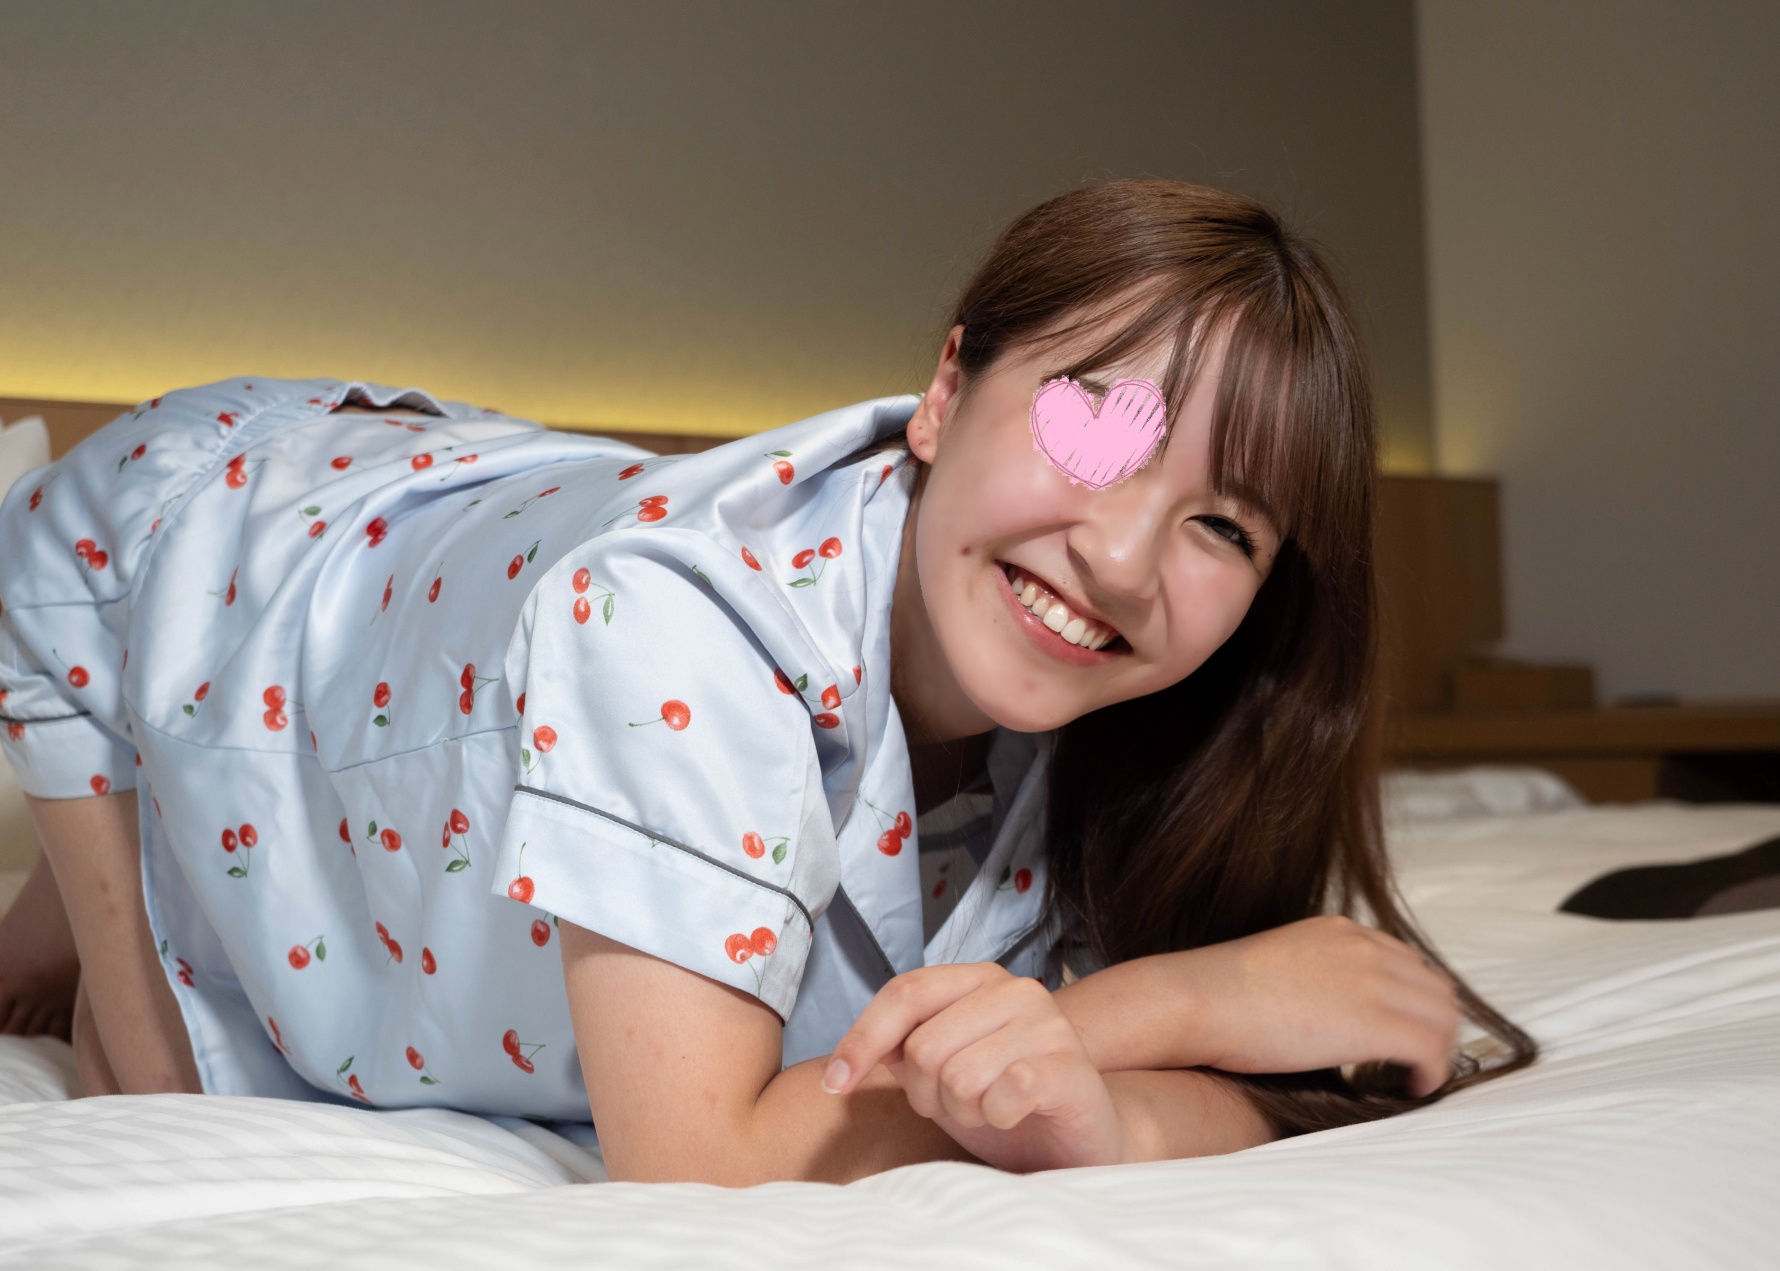 FC2 PPV 4143598 Pajama Monashi snonqyzj Pajama de Ojama I cant stop pushing Ai-chan 19 years old has a bright personality and a super cute smile I cant resist the reaction of a serious amateur with natural pubic hair